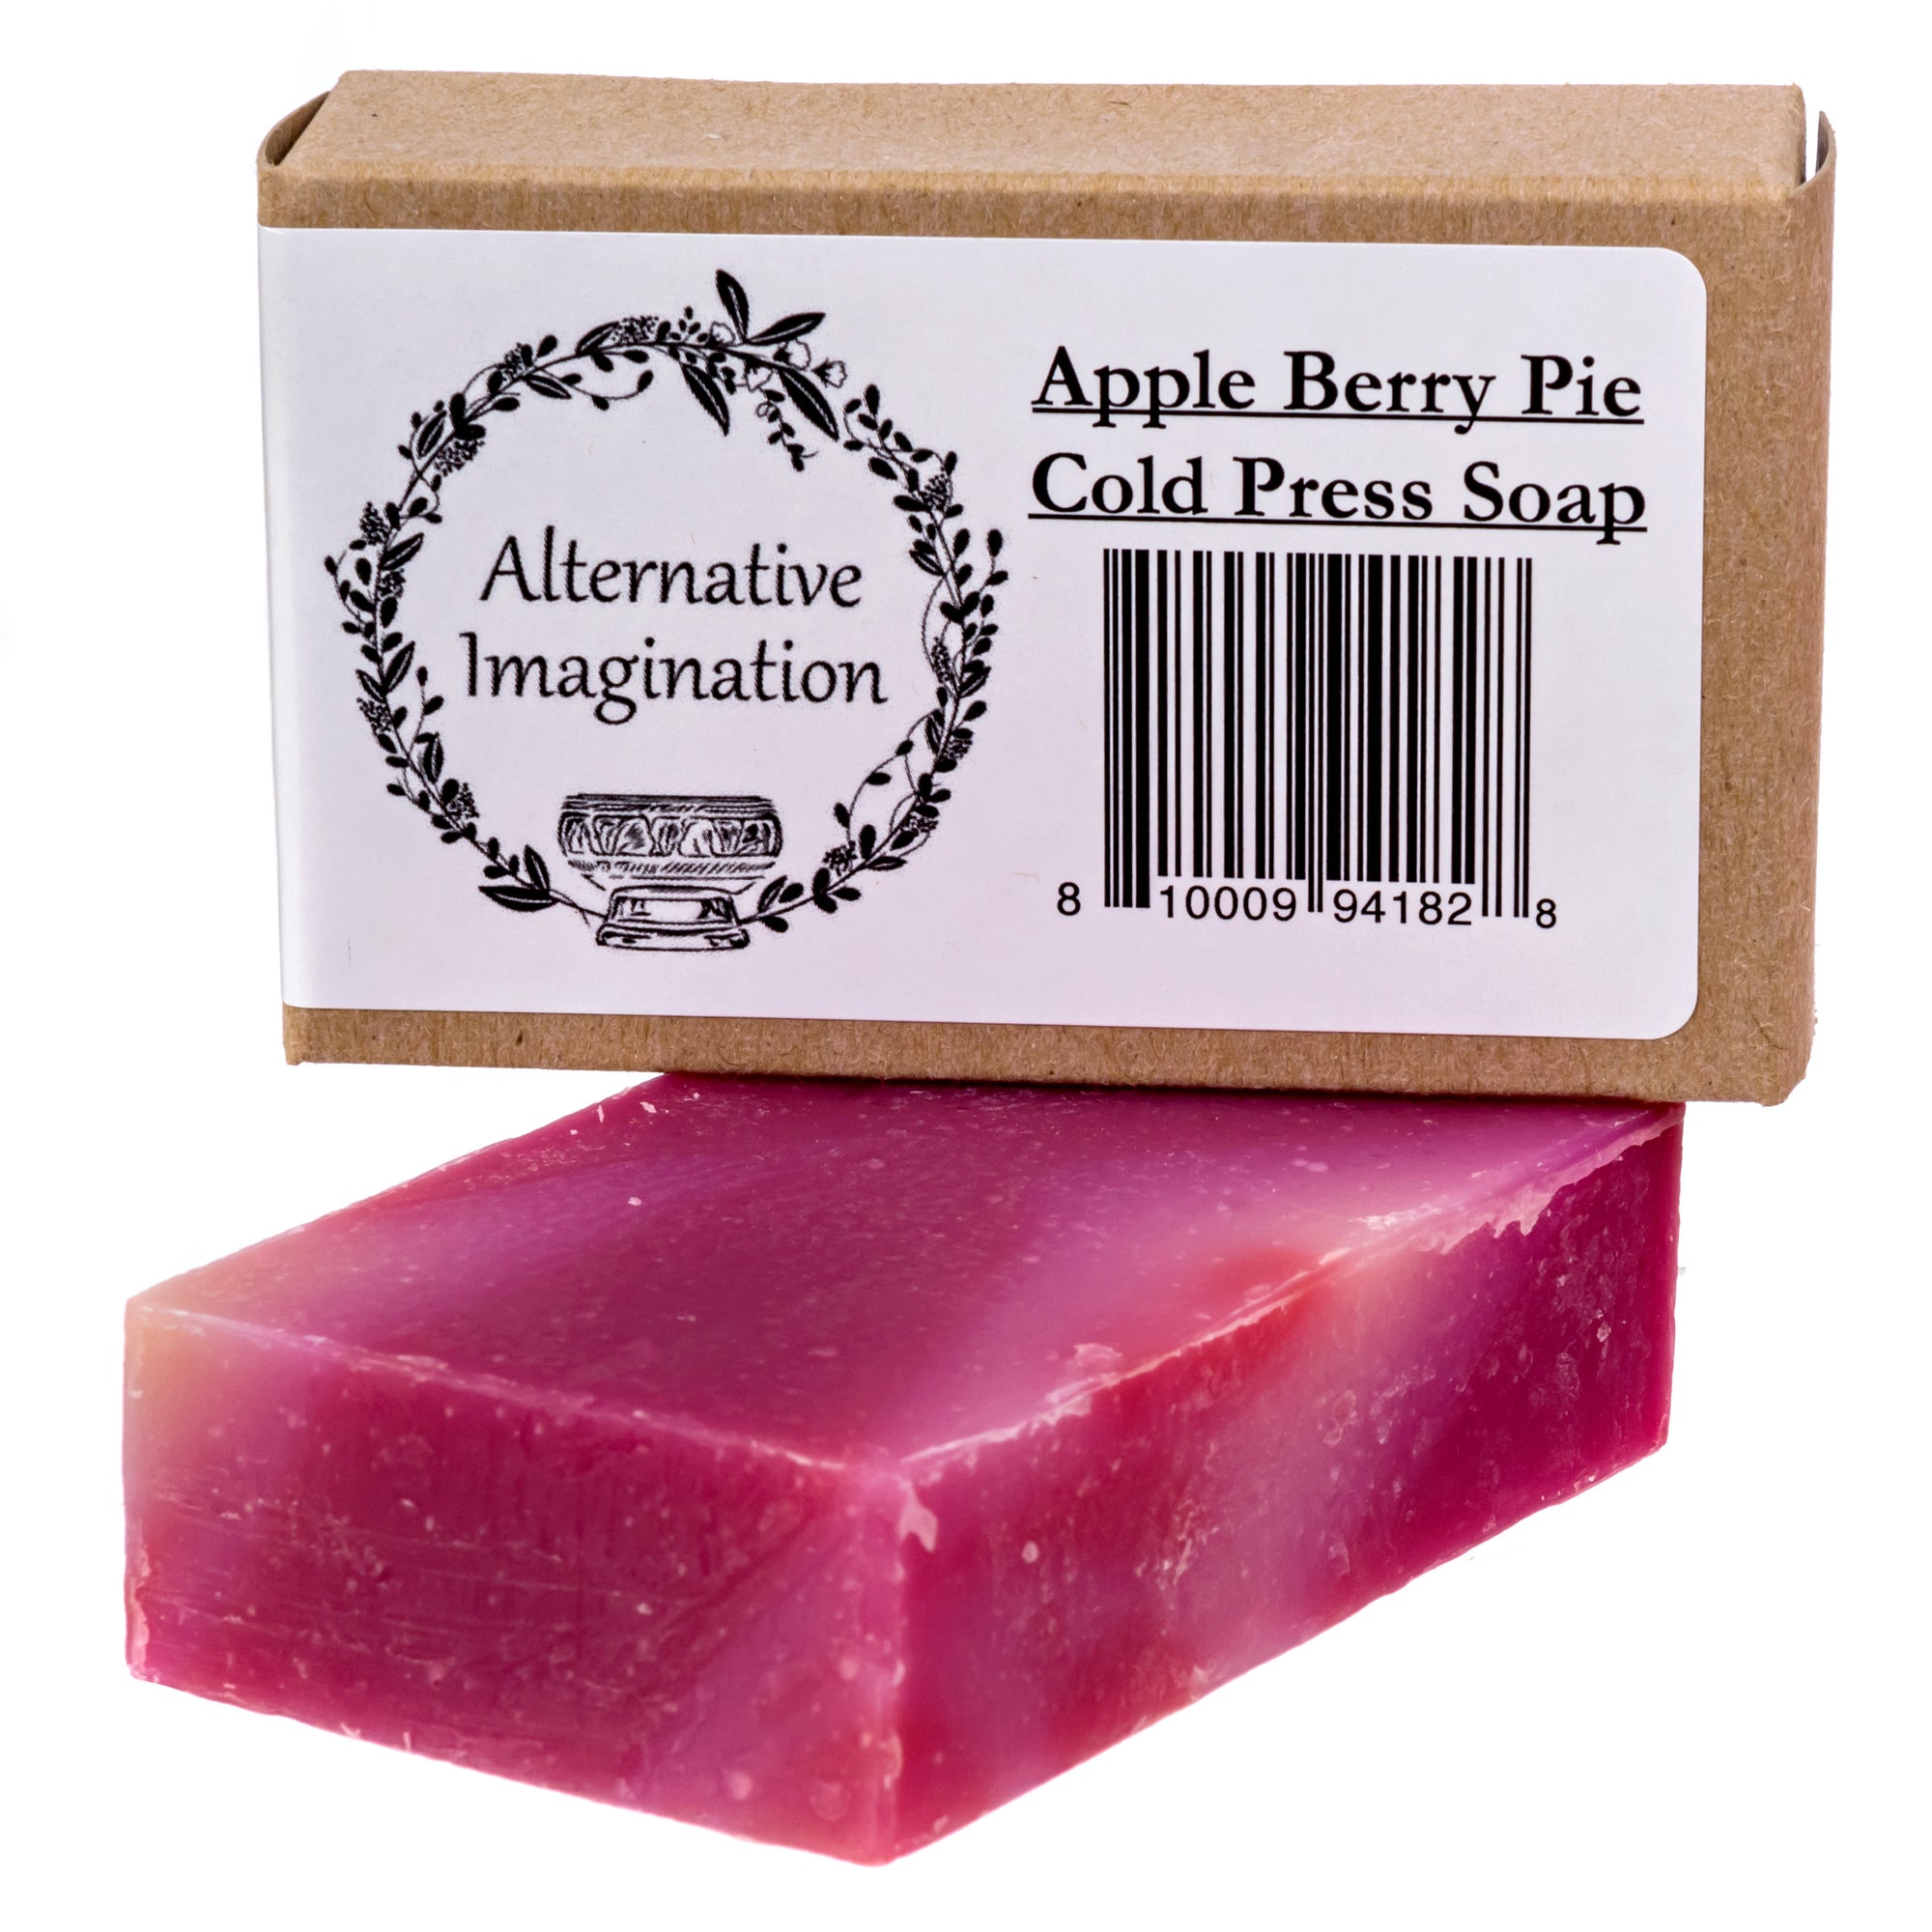 Cold-pressed Soap Bar - Soft Bars for Everyday Use